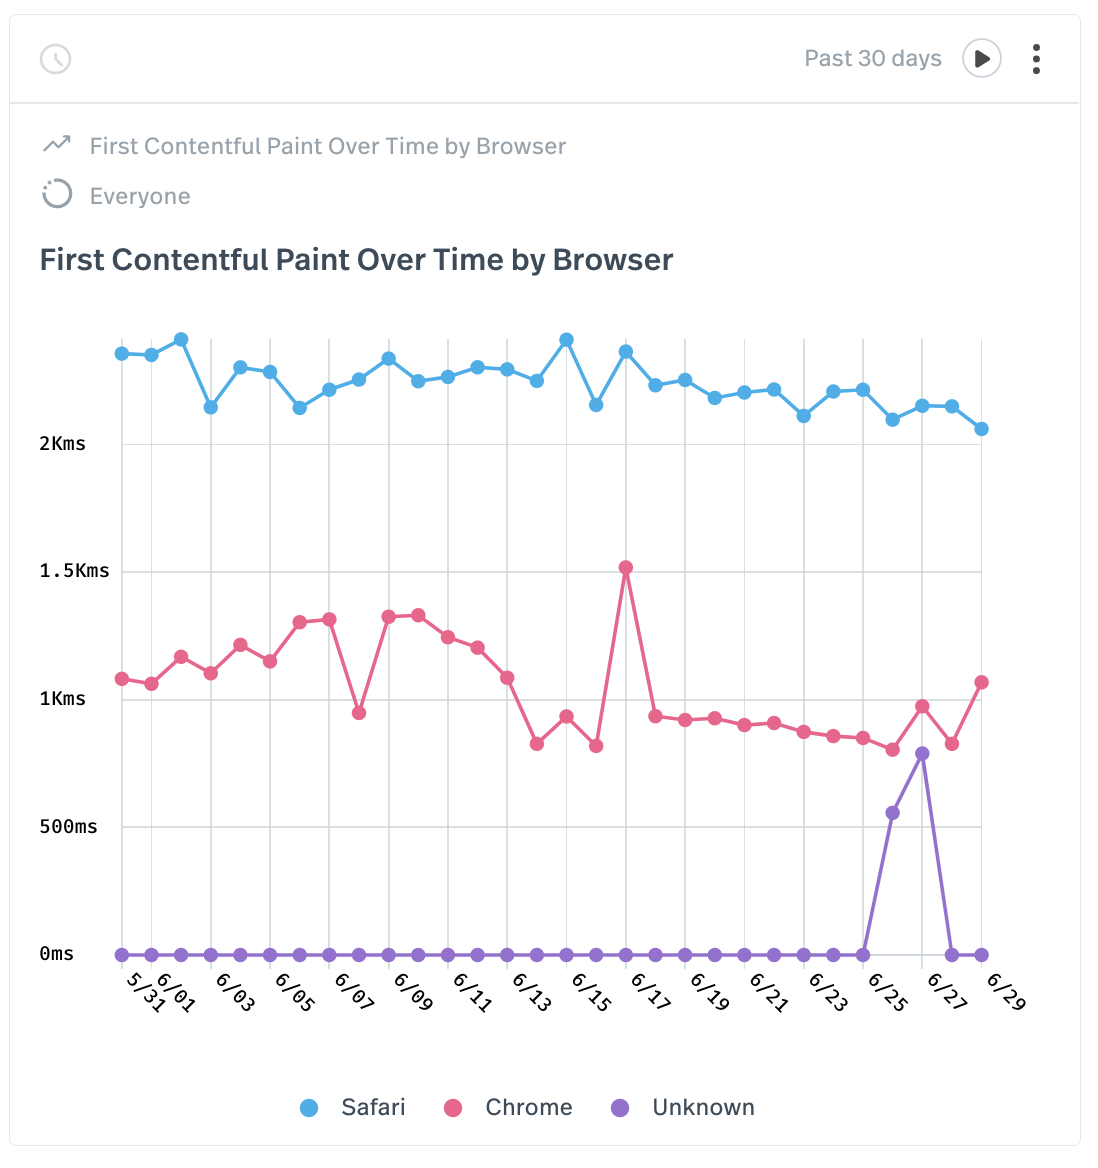 First_Contentful_Paint_Over_Time_by_Browser.png